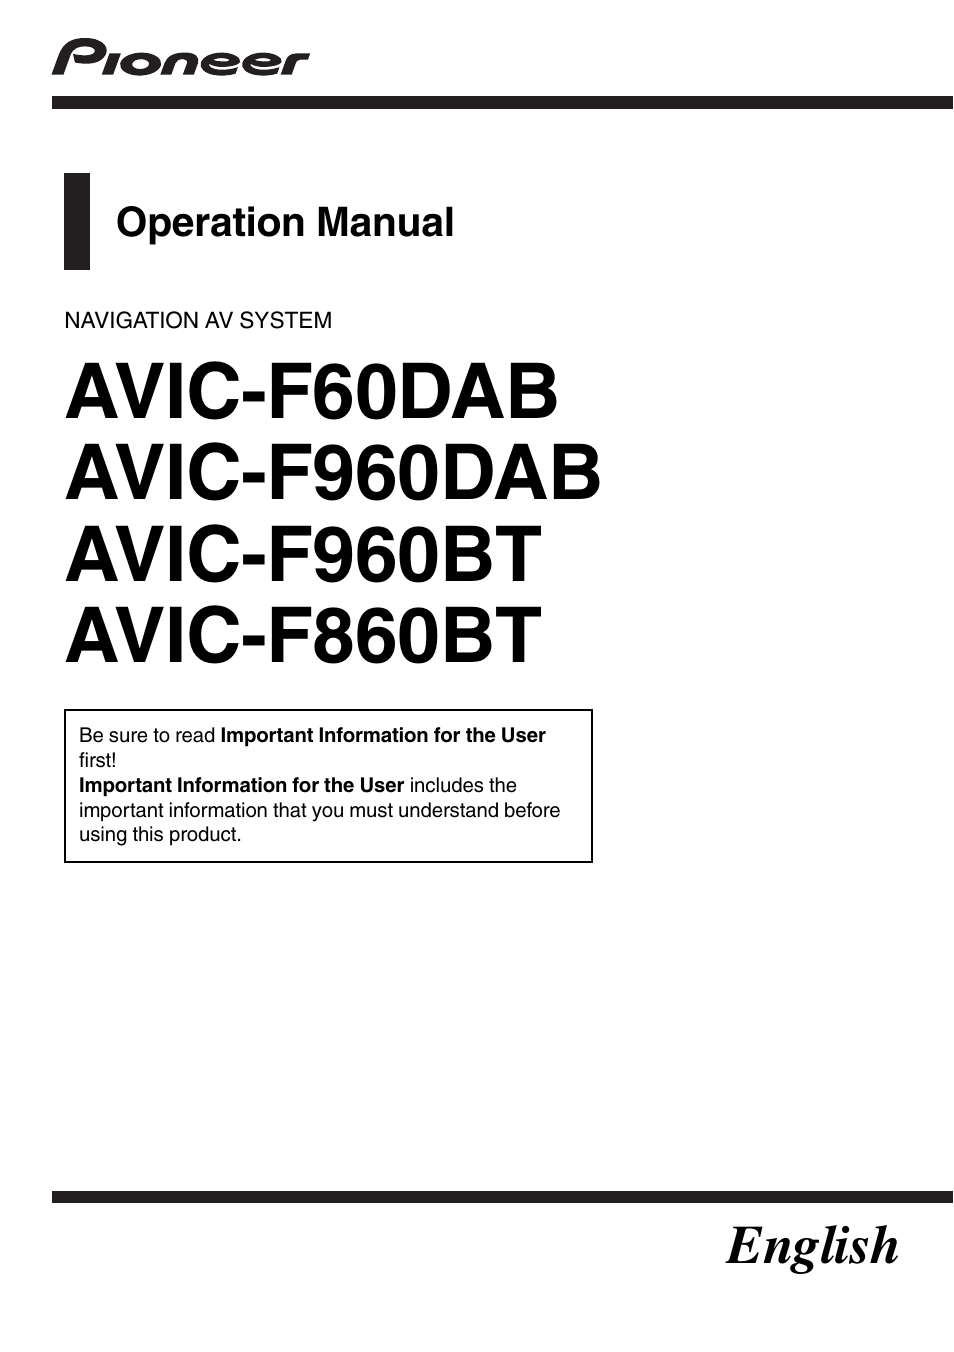 Pioneer AVIC-F860BT User Manual | 216 pages | Also for: AVIC-F60DAB, AVIC-F960DAB,  AVIC-F960BT